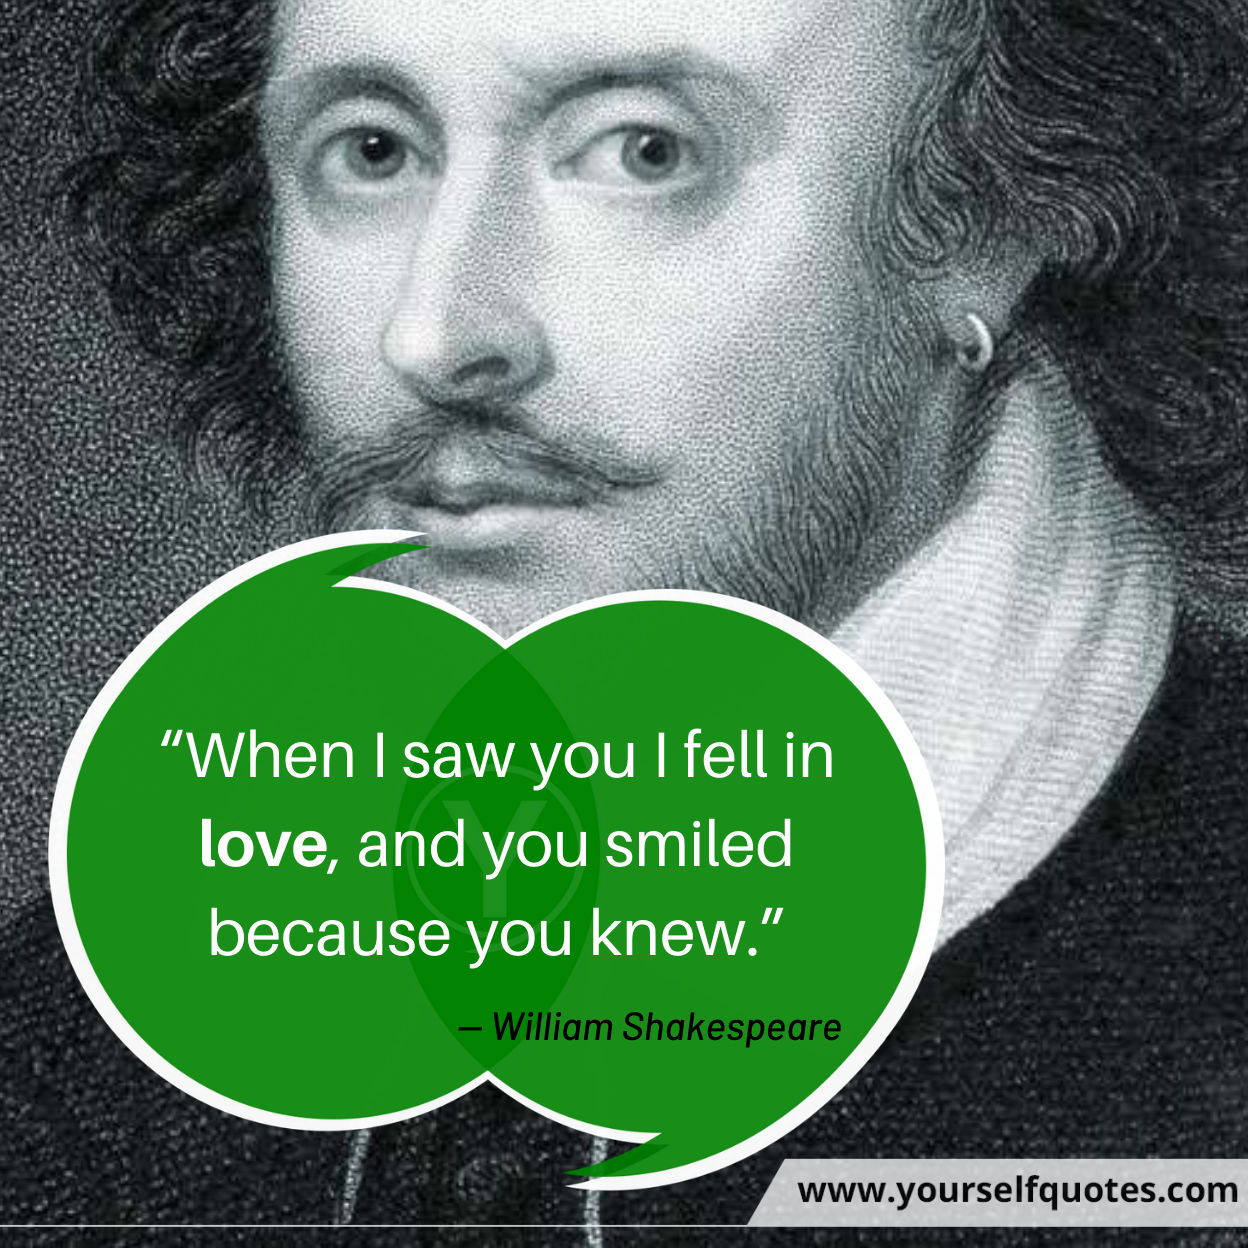 Quotes on Love By William Shakespeare